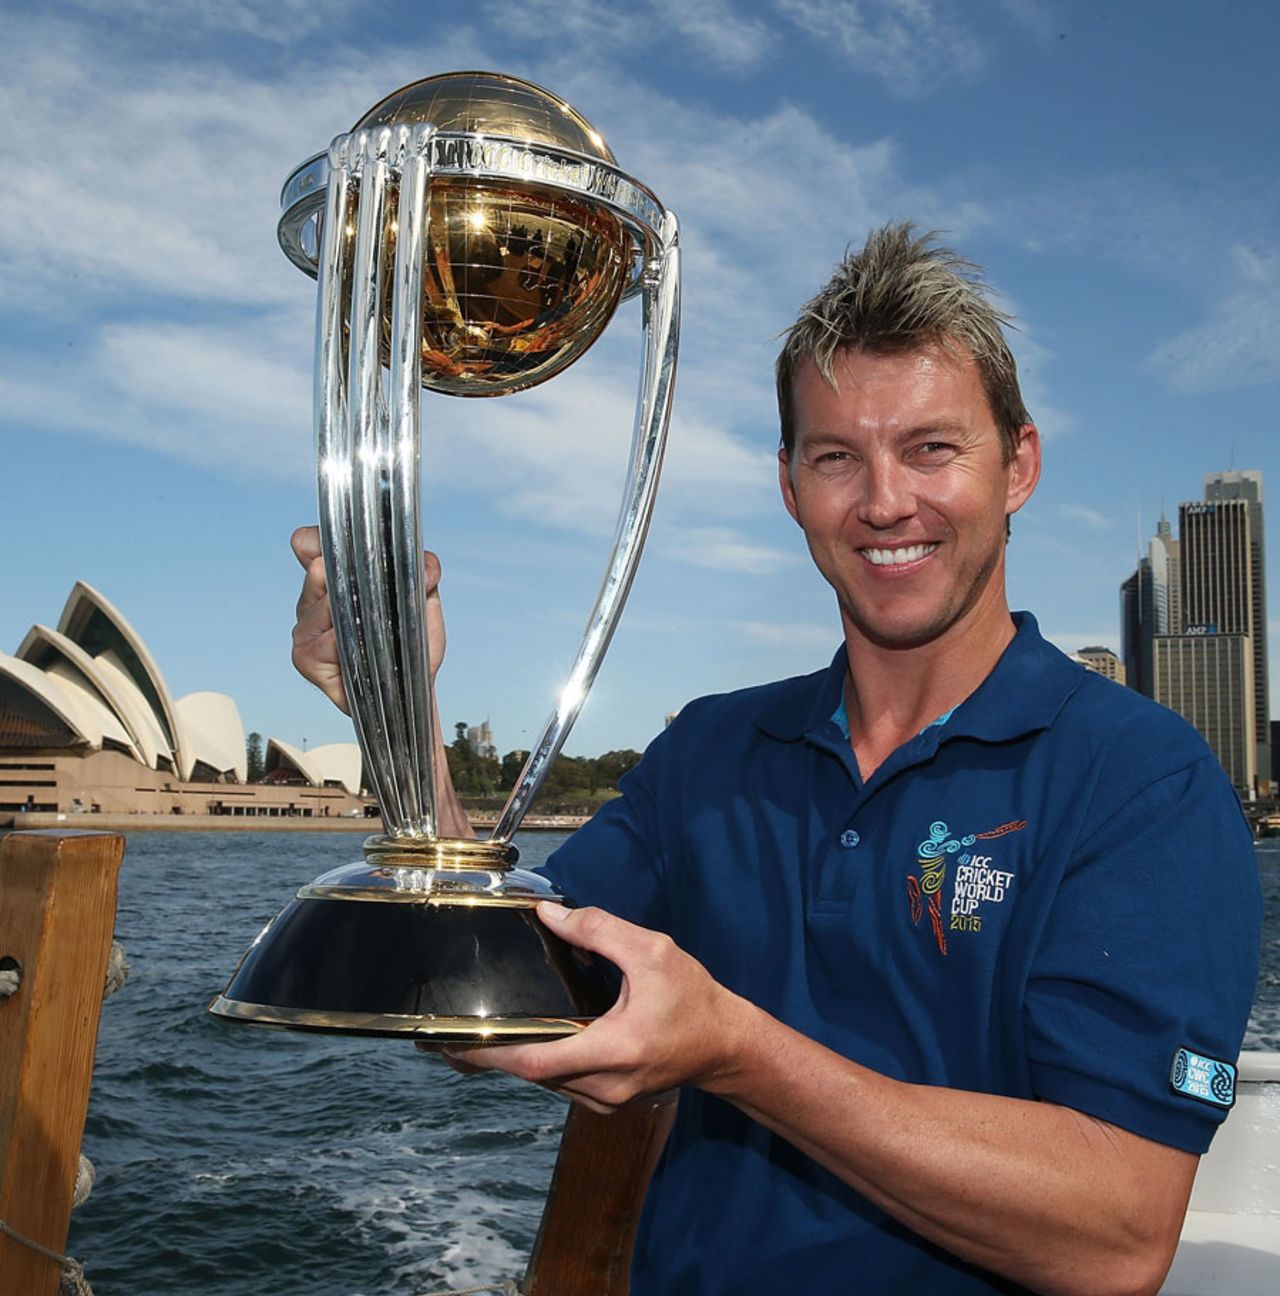 Brett Lee with the ODI World Cup trophy, Sydney, October 2, 2013